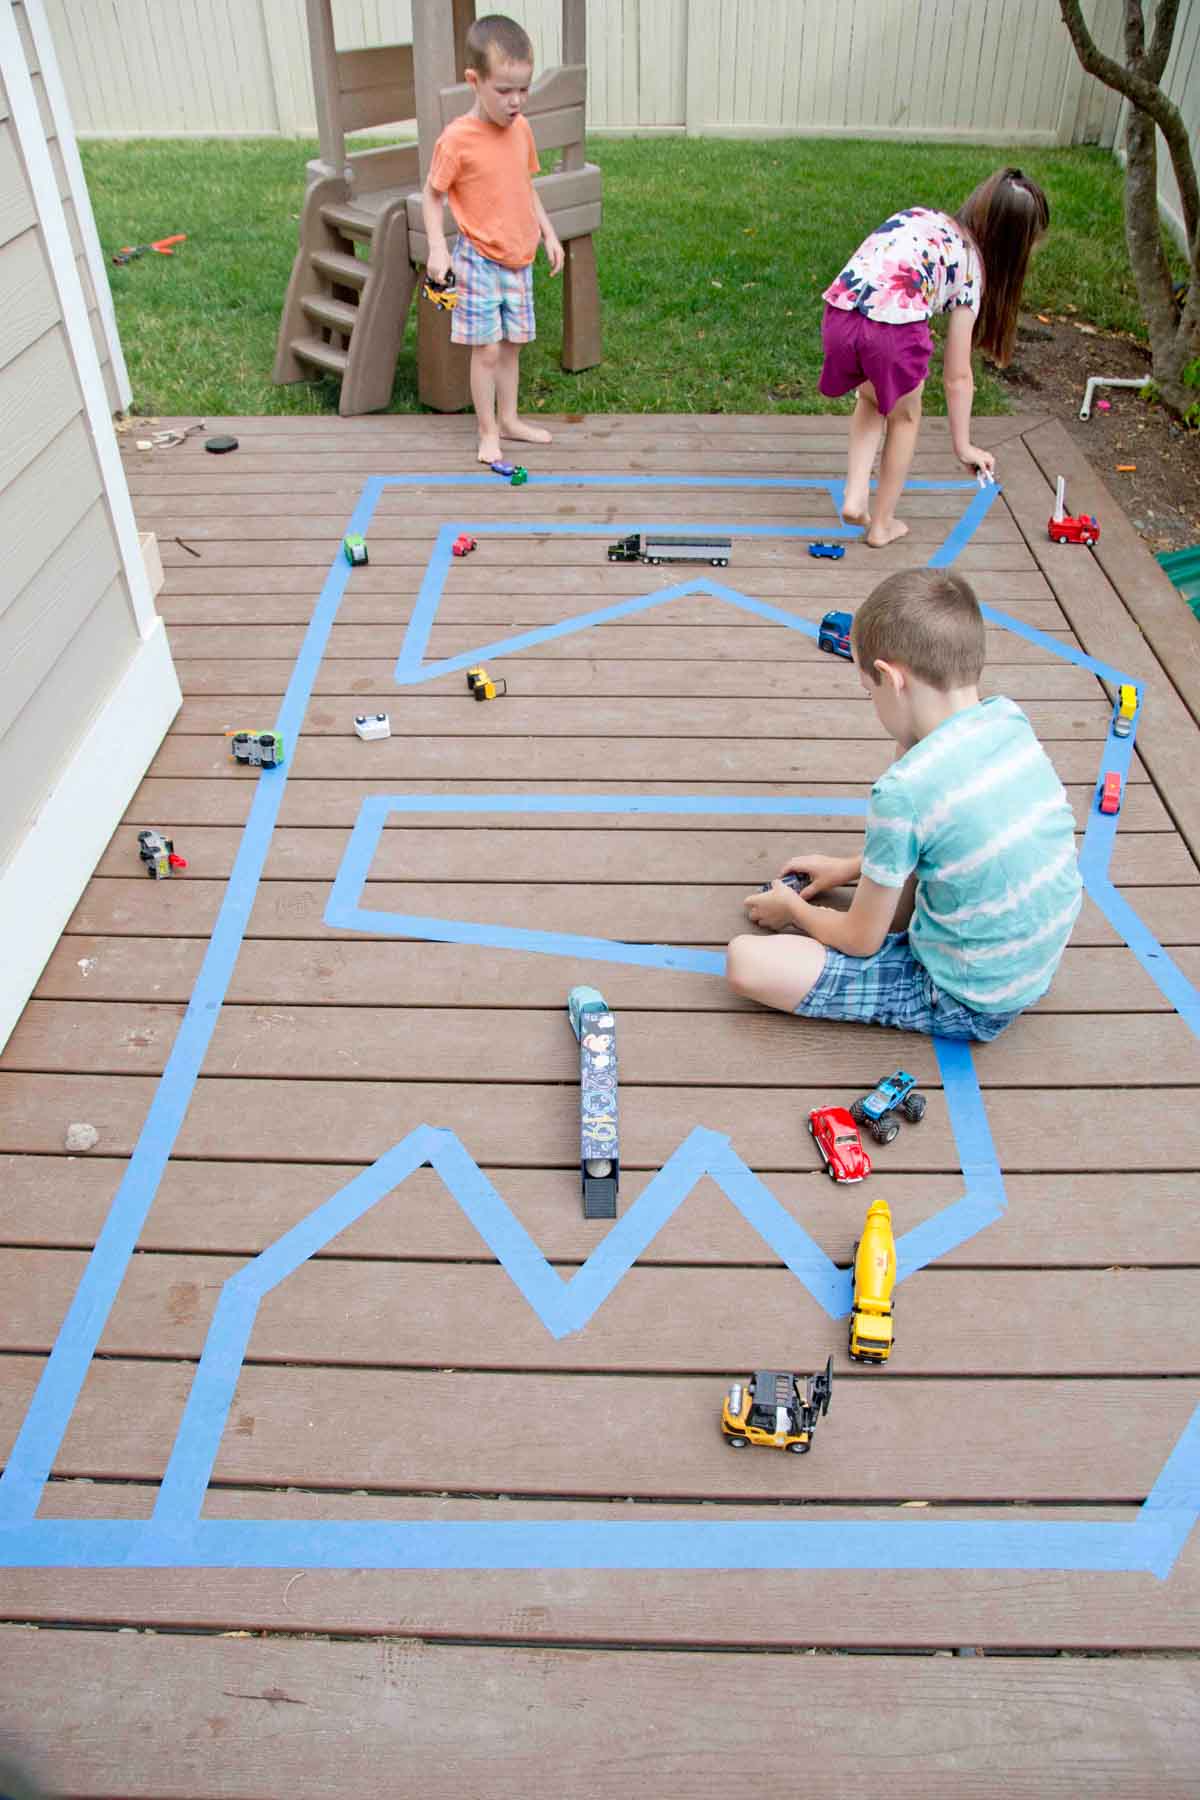 Three kids play on a deck with an outdoor road made from painter's tape. There are small cars around them.